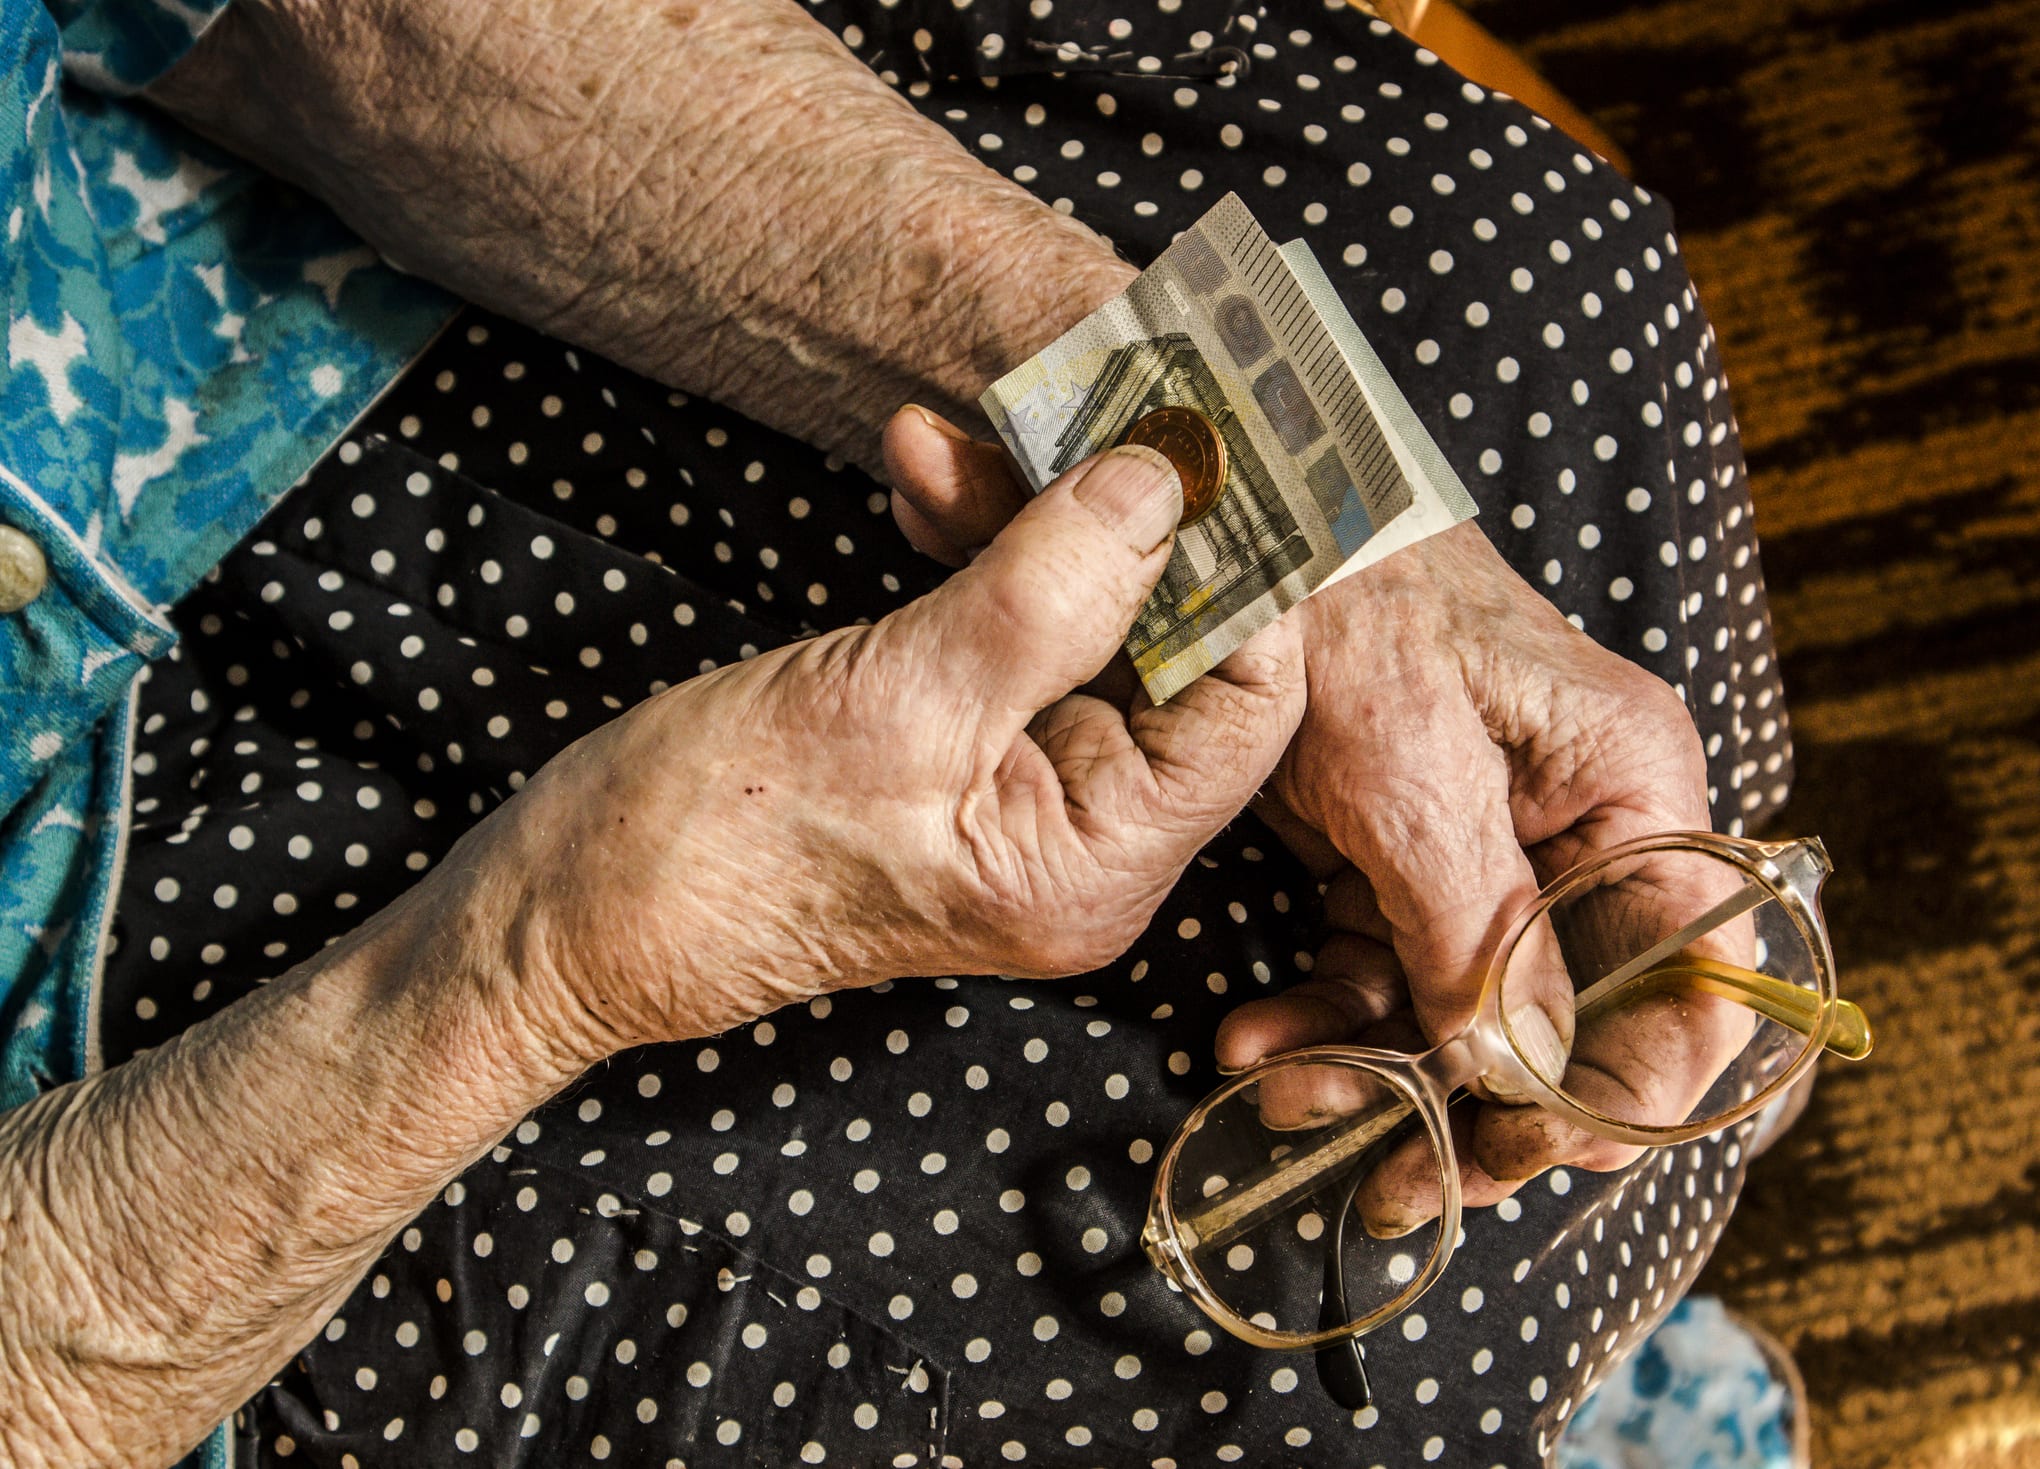 Hard working retired old woman holding money euros in her wrinkled hands.